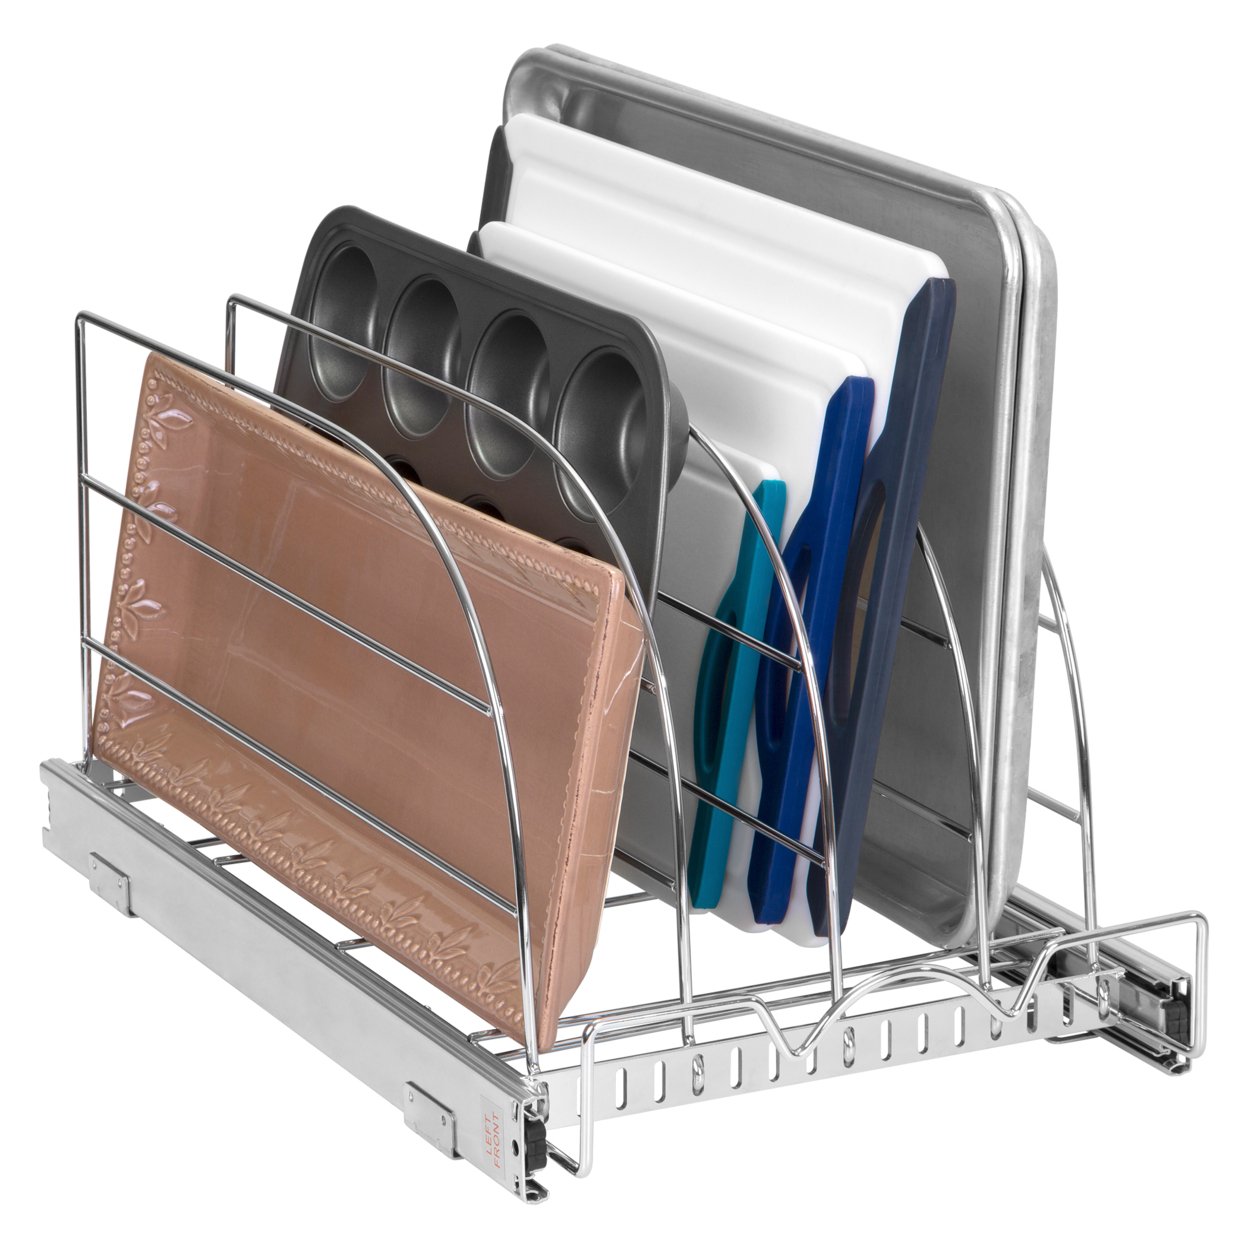 Pull Out Organizer Rack For Bakeware 12.5” W X 21” D X 10.63” H Heavy Duty, Chrome